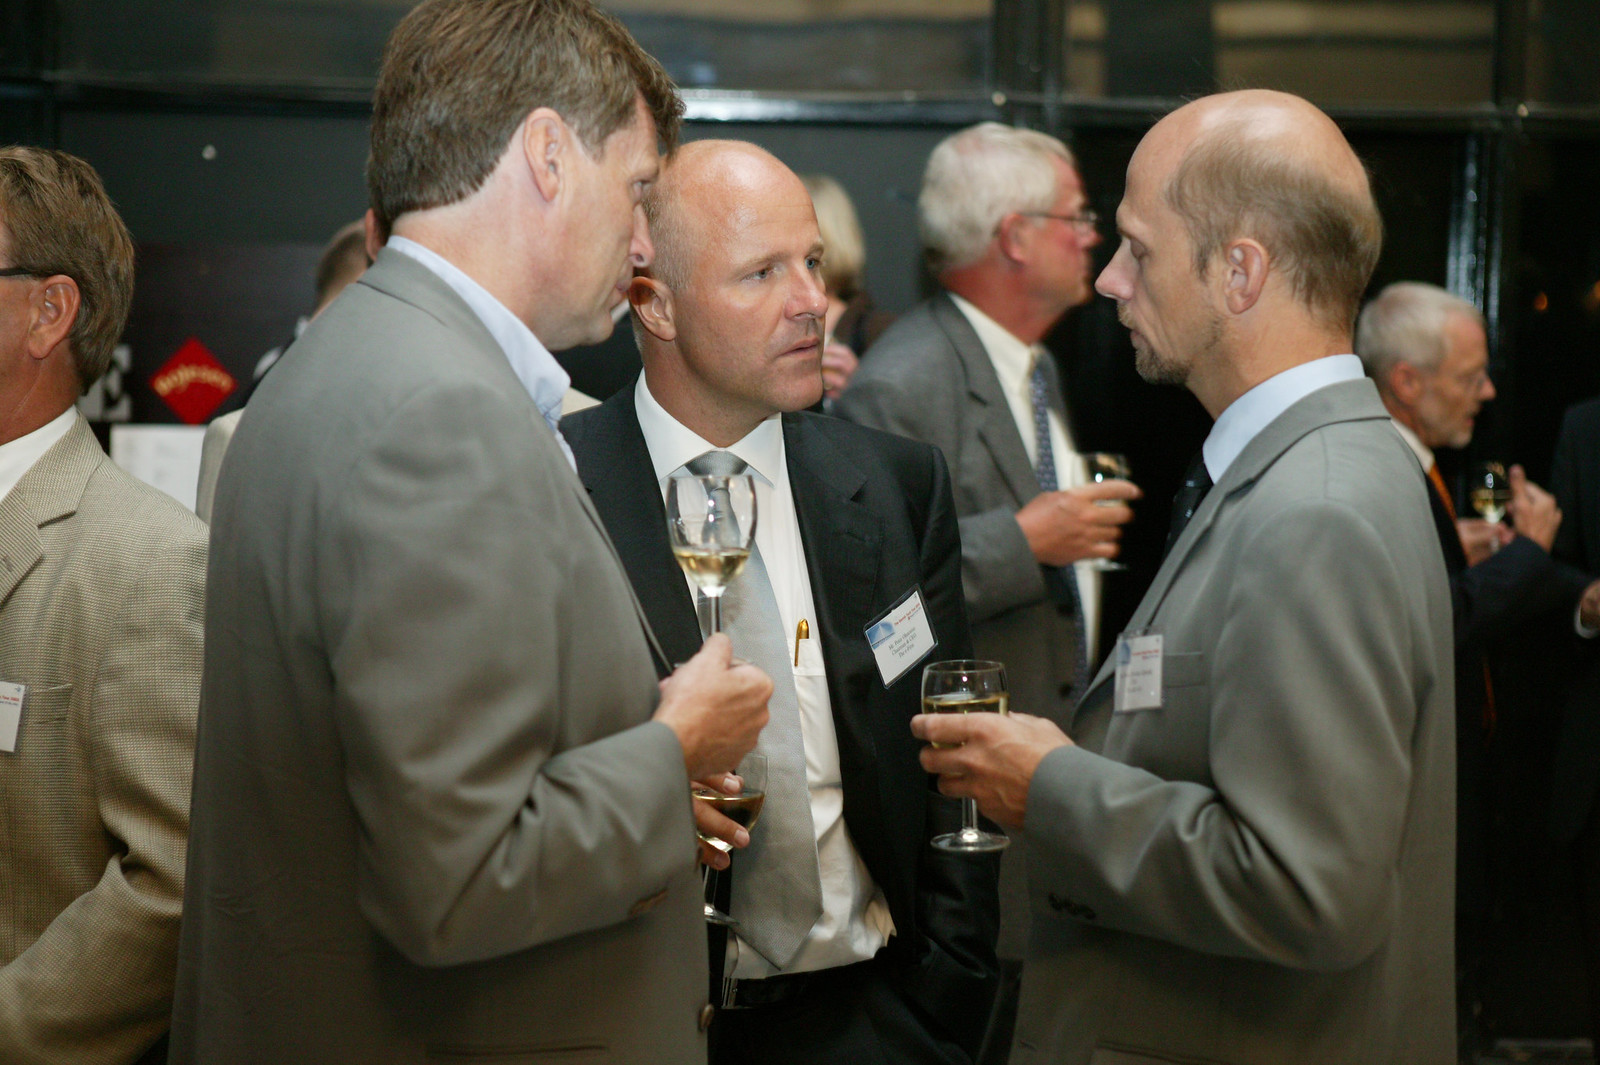 10 Peter Ohnemus networking with Co CEOs